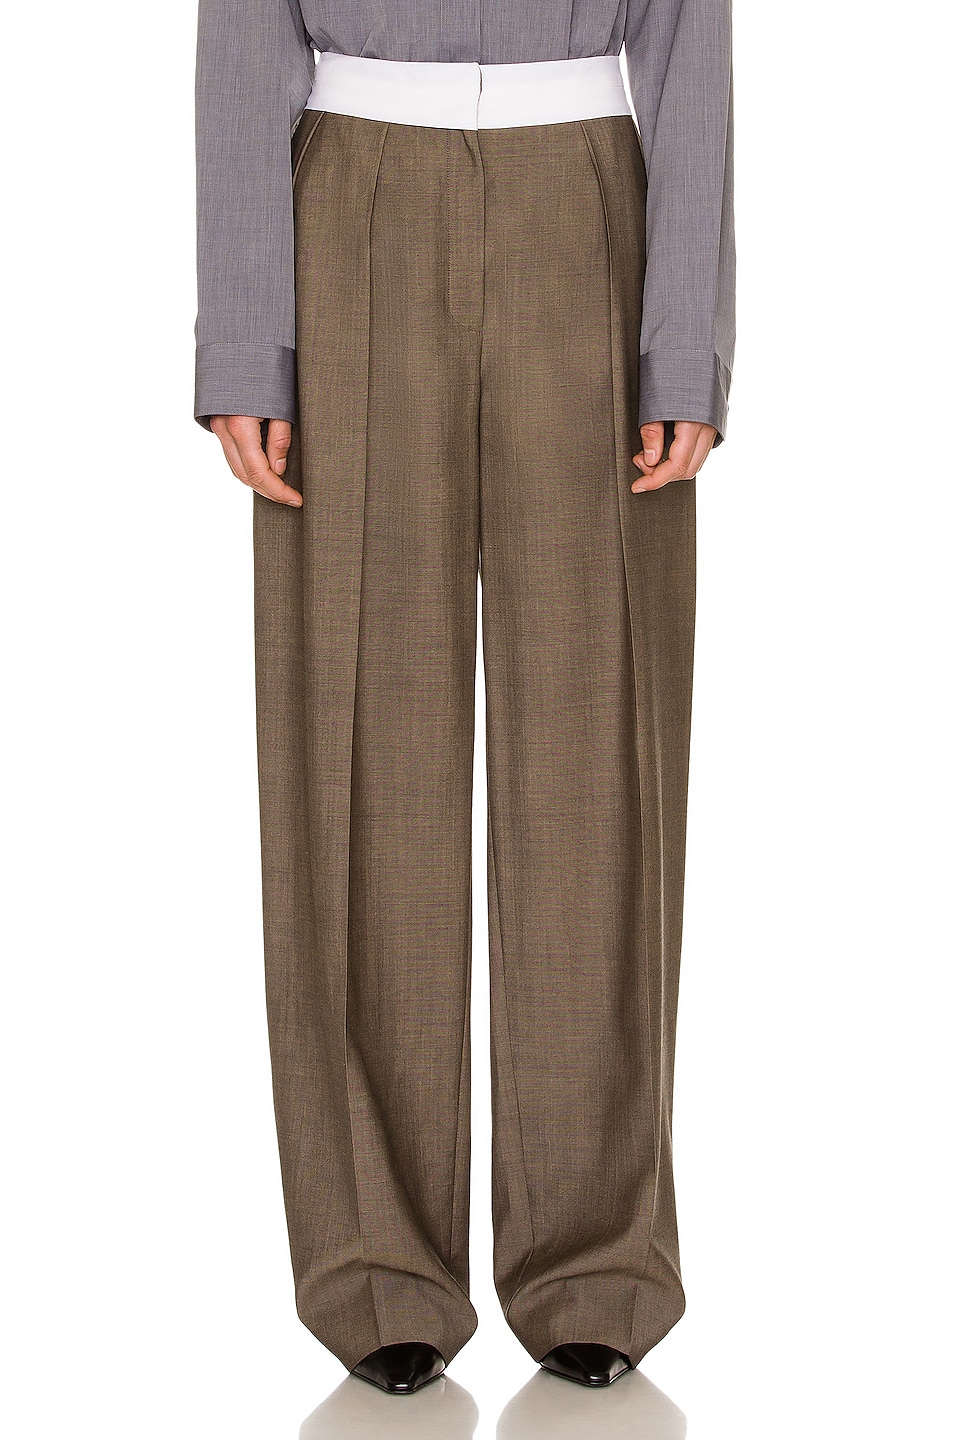 Image 1 of The Row Milla Pant in Camel & Black